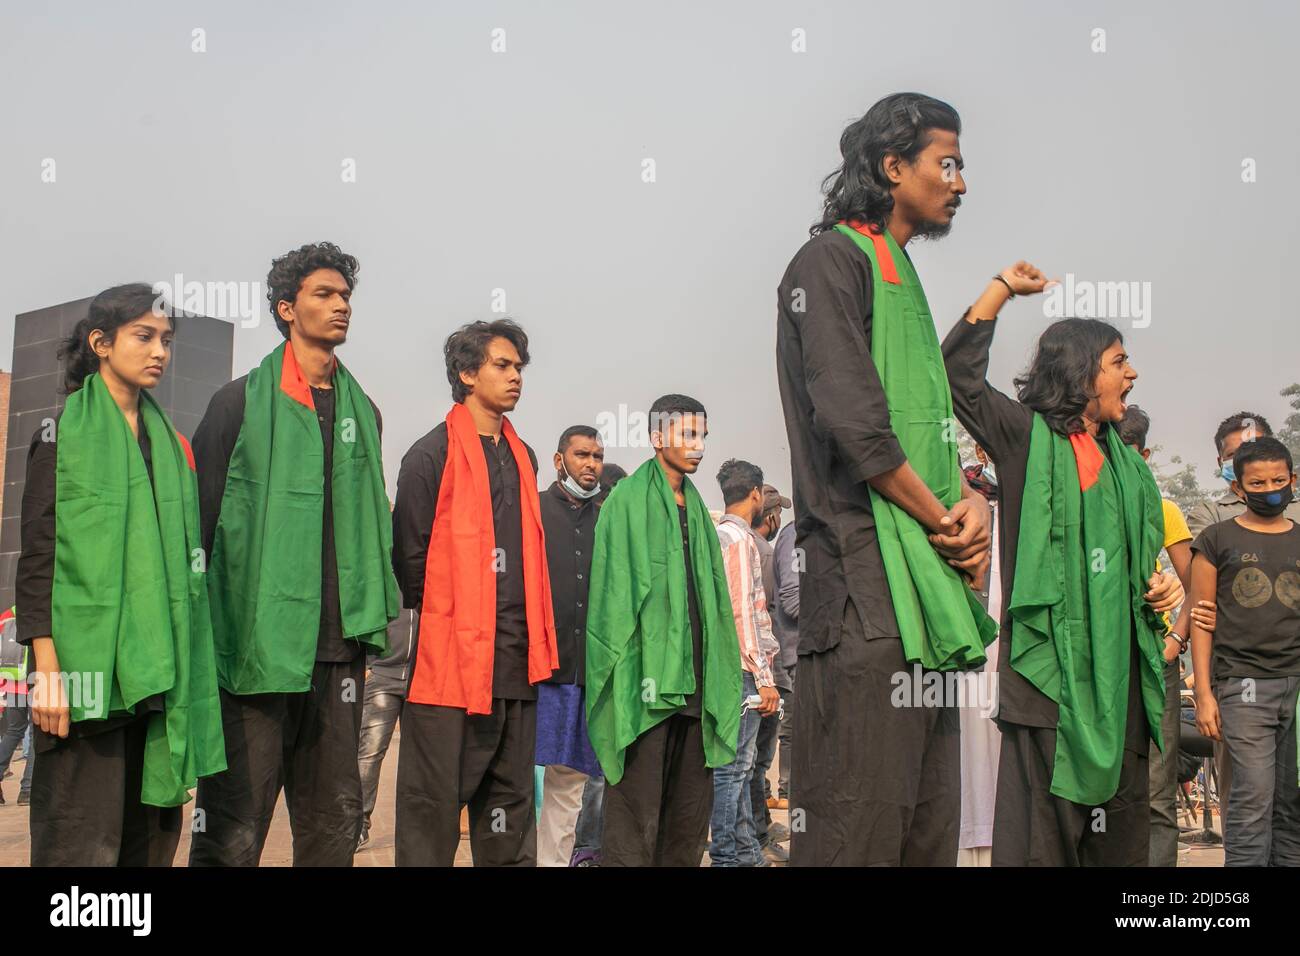 Bangladeshi theatre artists perform during the Martyred Intellectual Memorial in Dhaka.Thousands of Bangladeshis paid tribute to the dozens of intellectuals killed 43 years ago during the war which won the South Asian country independence from Pakistan. The intellectuals were systematically killed across the former East Pakistan by the Pakistani army and their collaborators to maim the emerging nation of its talented and intellectual people. Stock Photo